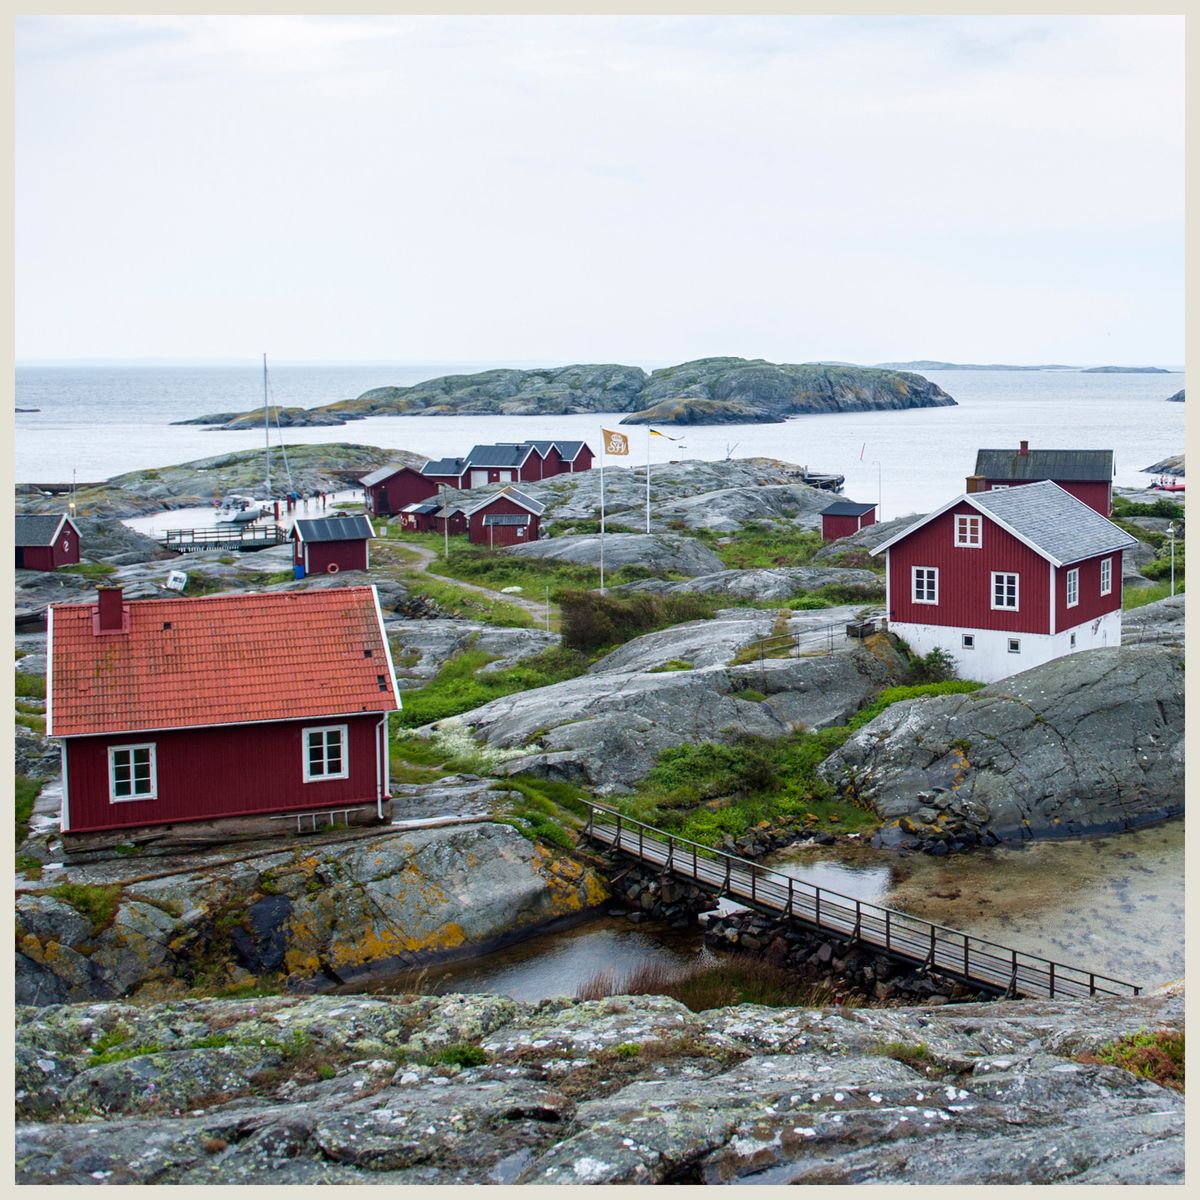 swedish summer homes, red and white cottages, ocean, house by ocean